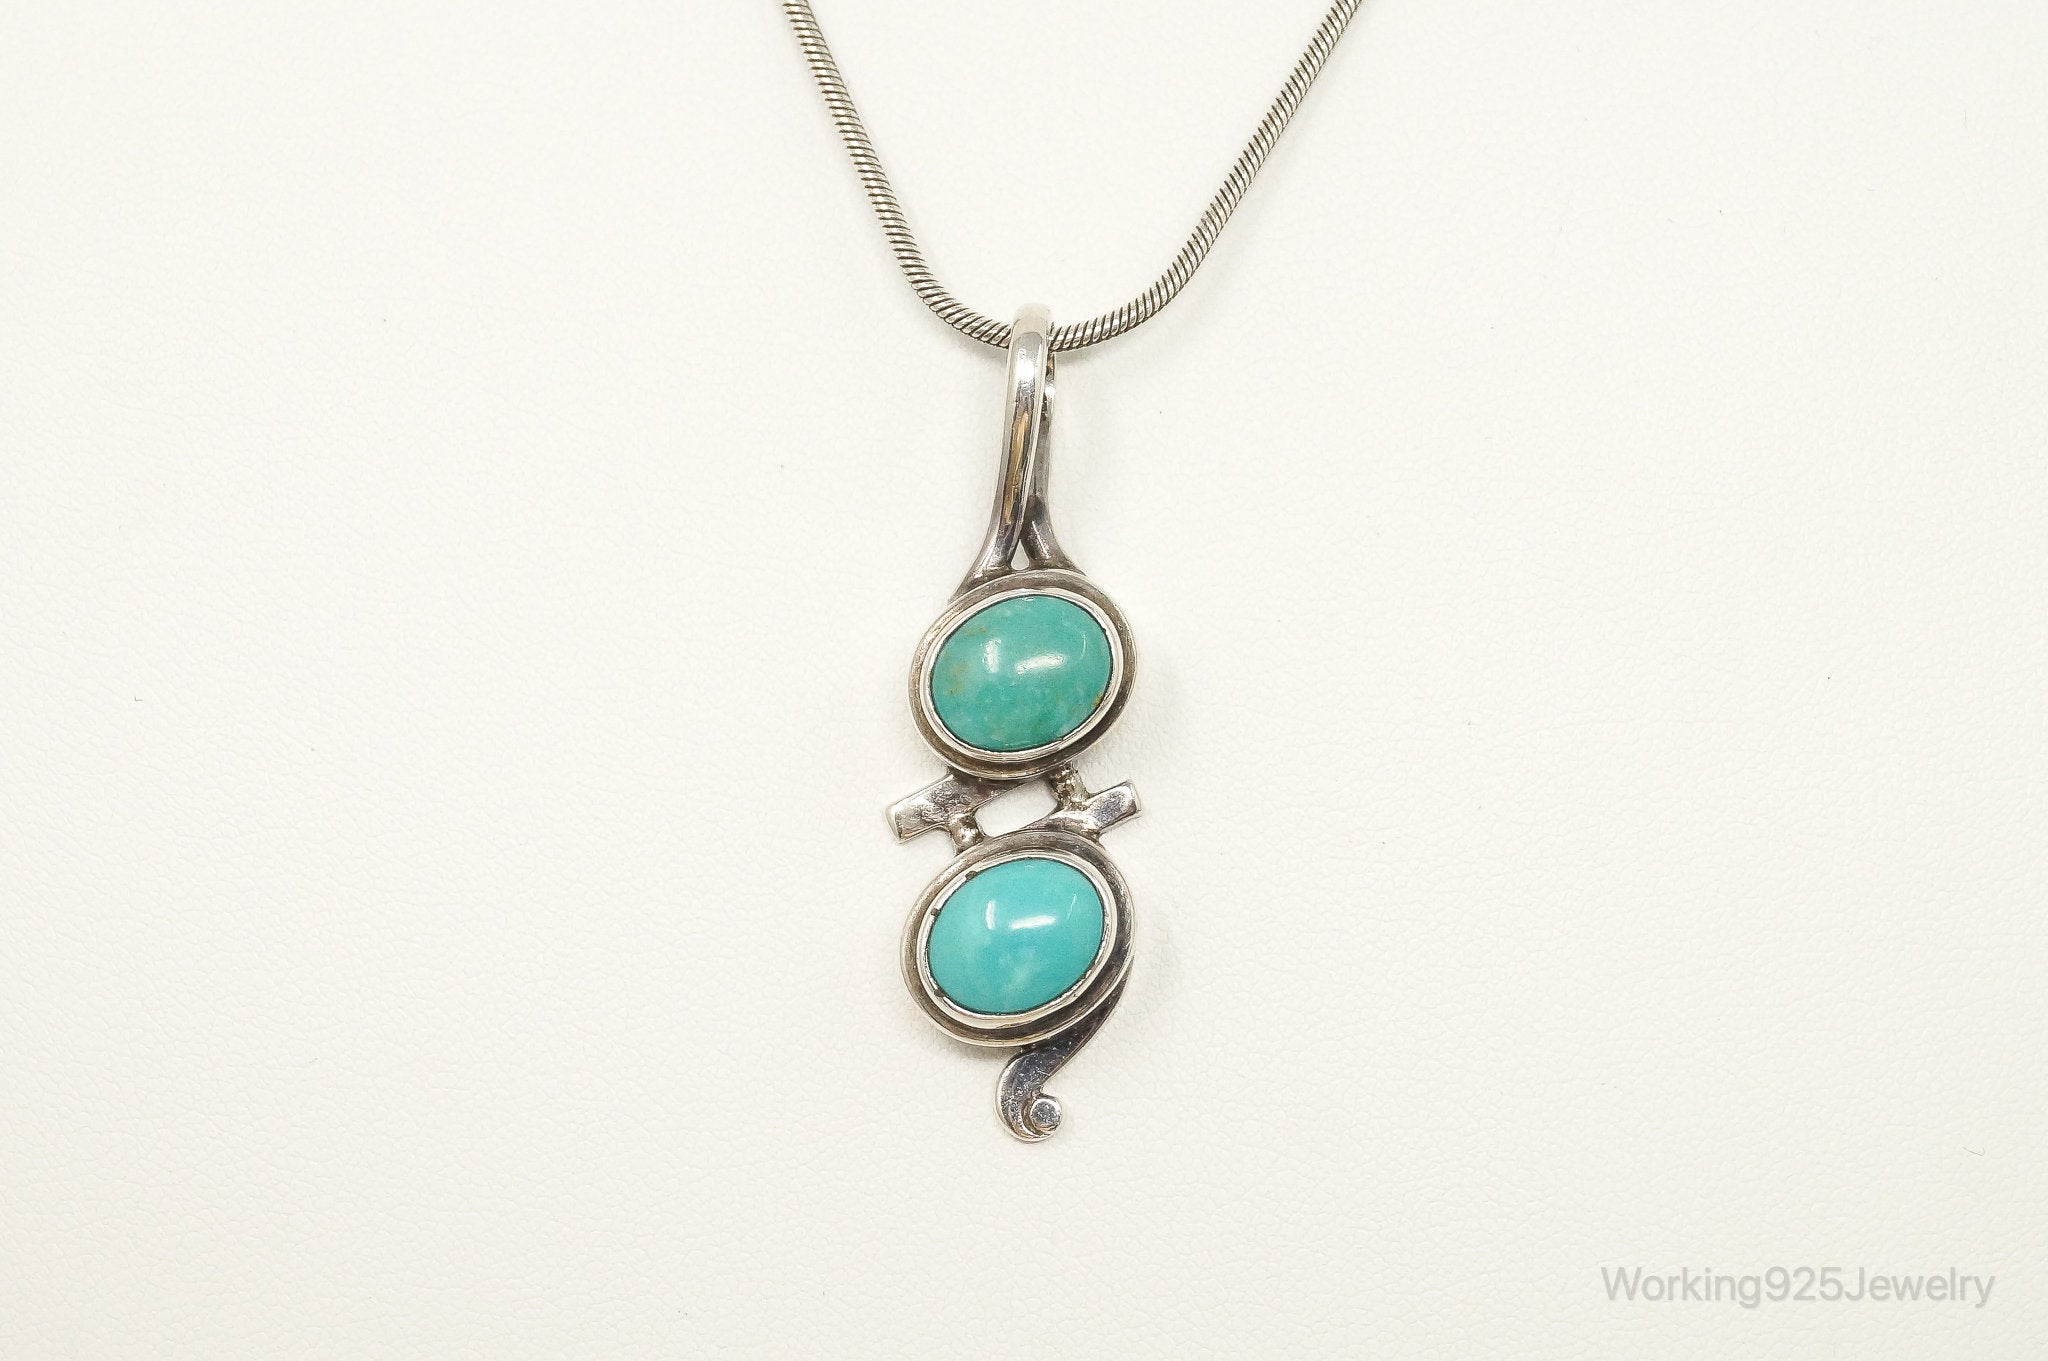 VTG Native American JS Turquoise Sterling Silver Necklace